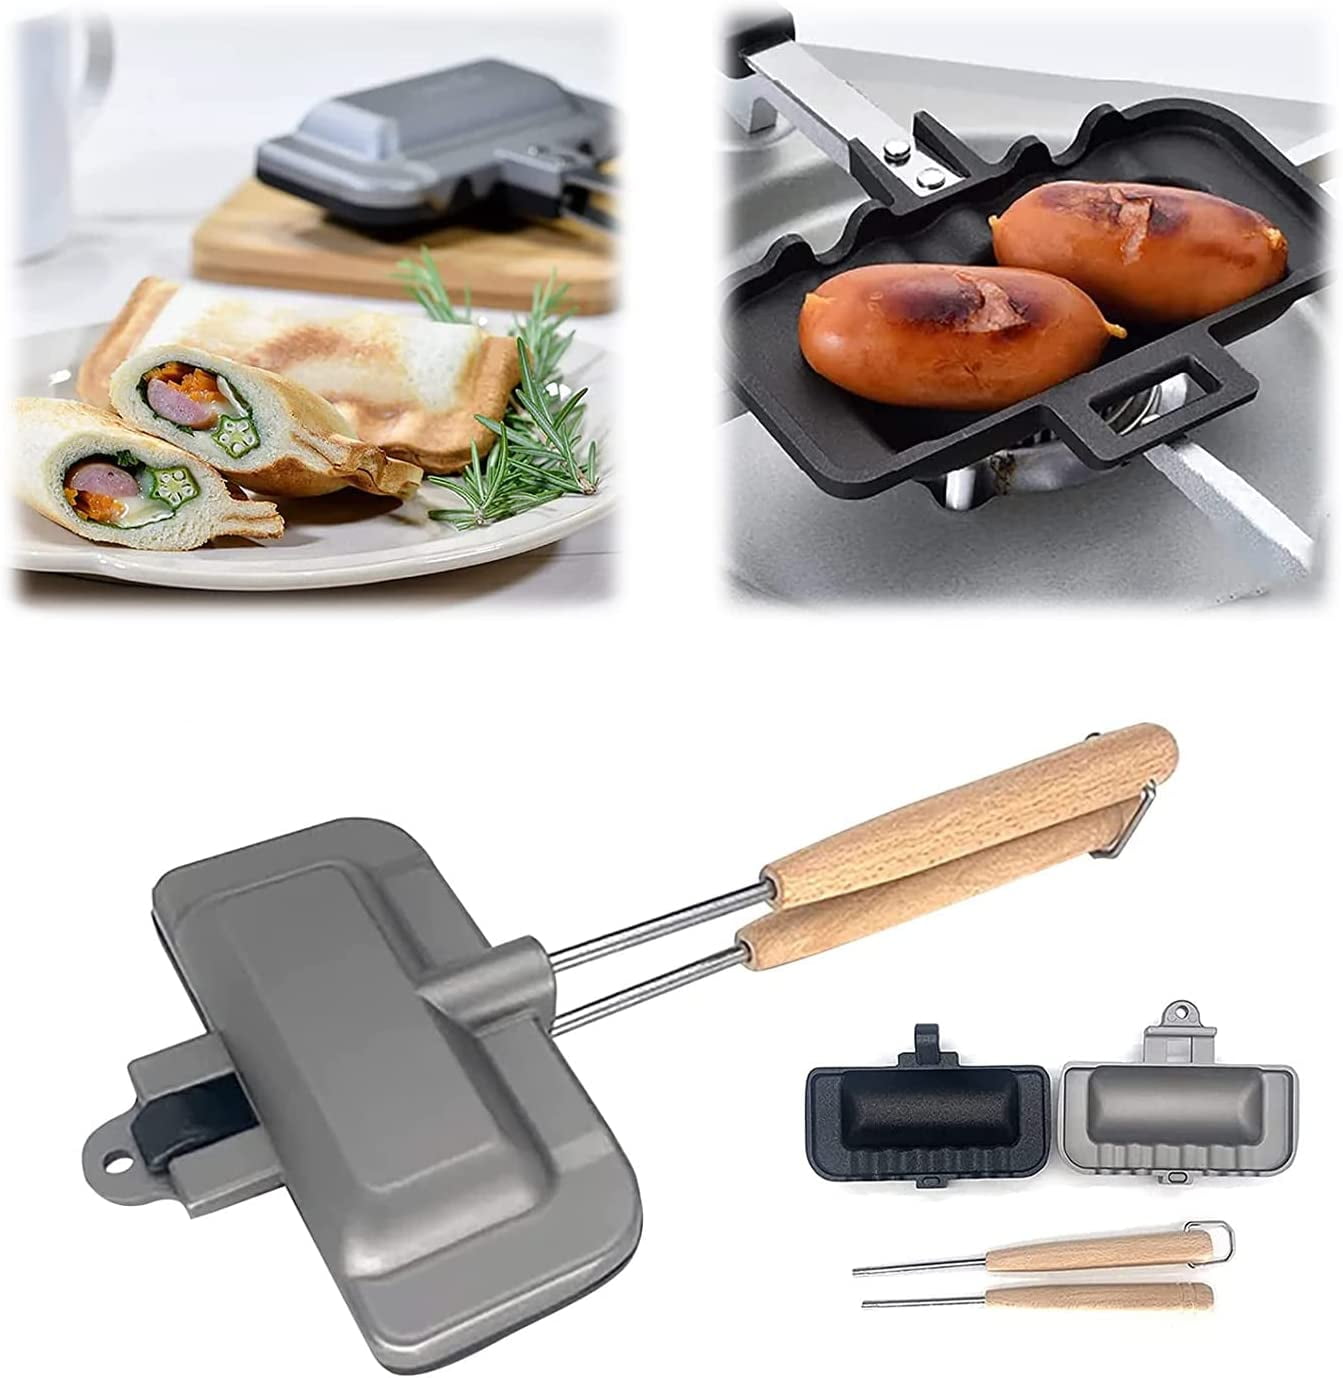  Double-sided Sandwich Pan，4w1h Sandwich Maker Hot Dog Press  Portable Sandwich Press For Breakfast Pancakes, Omelets, Frittatas, Bread  And Bake Bread: Home & Kitchen